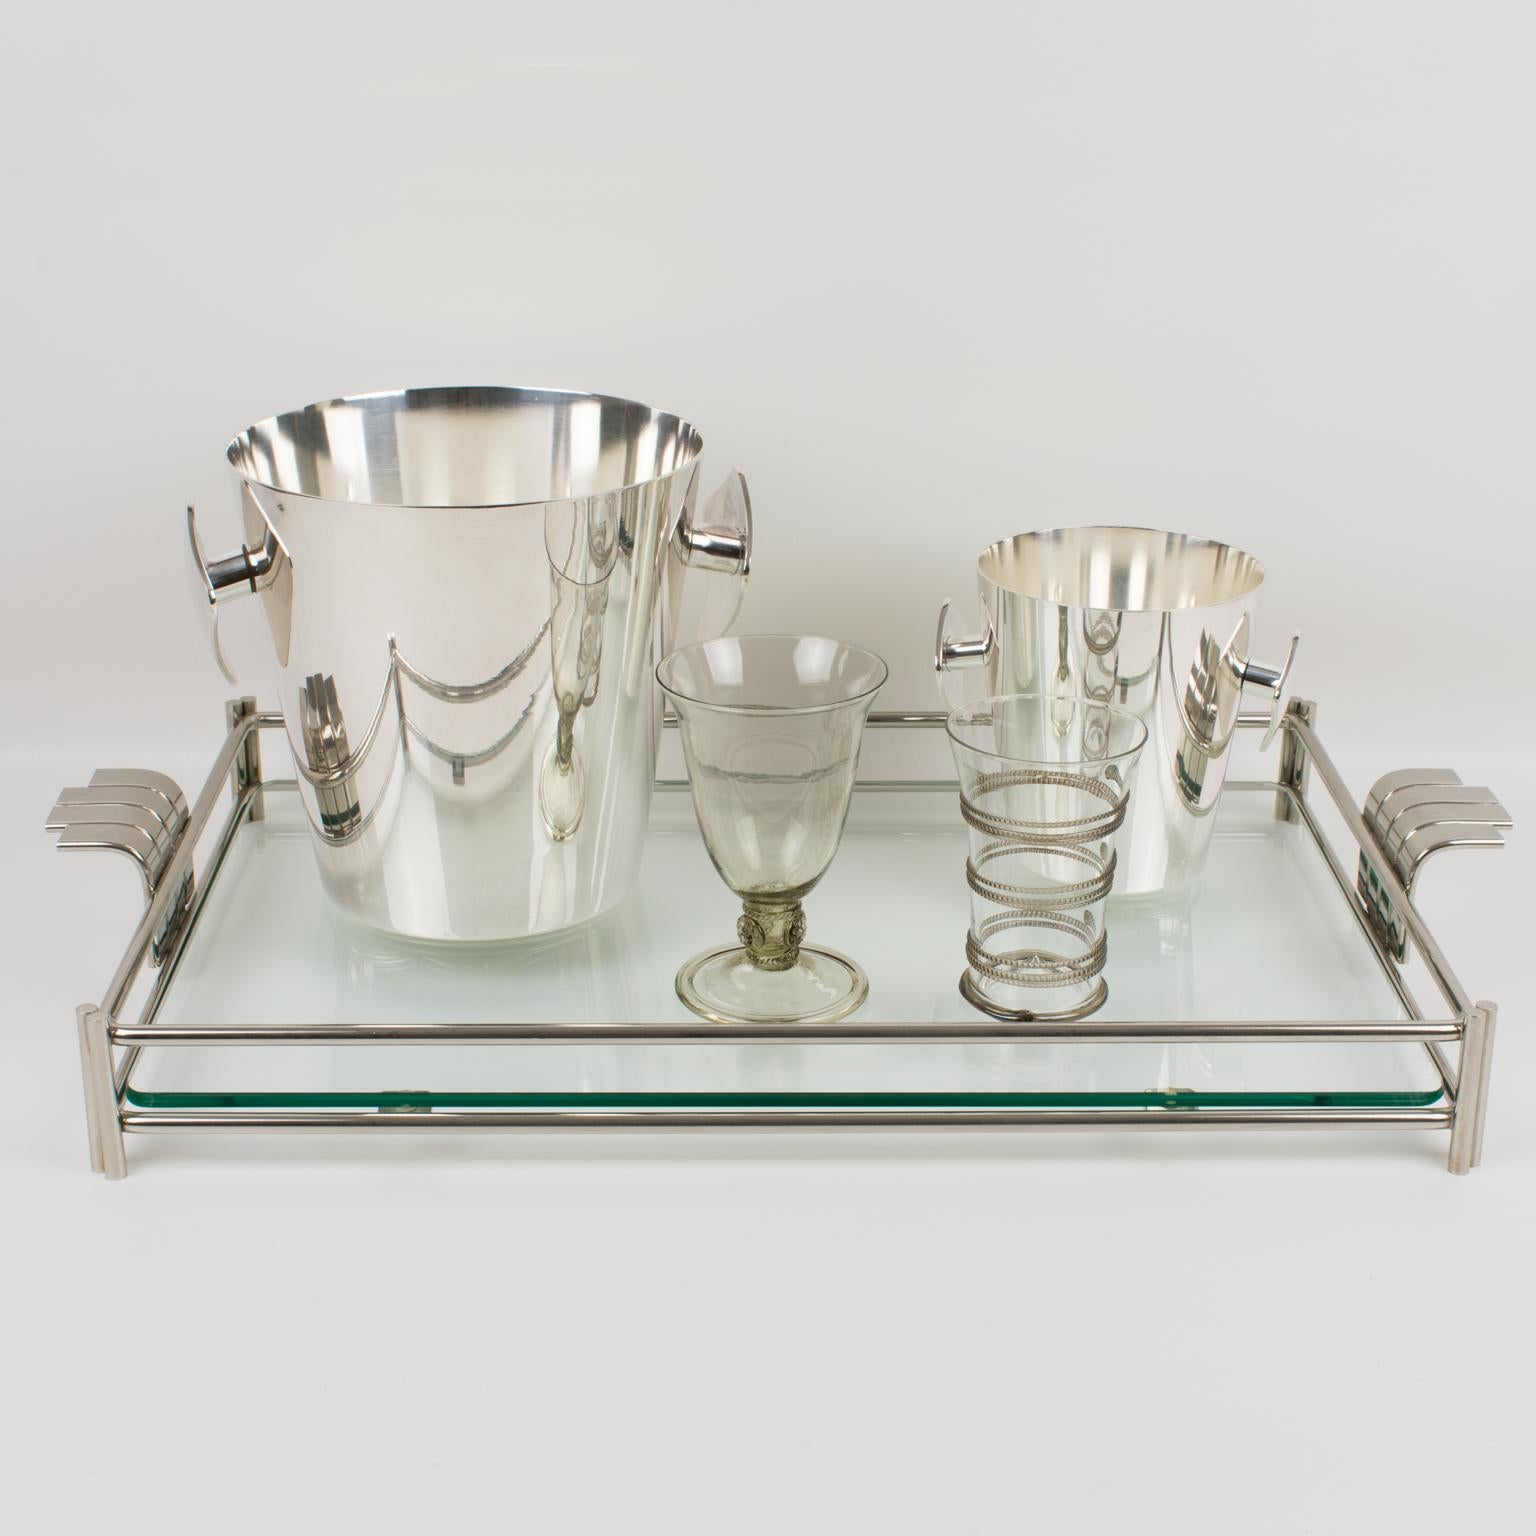 Late 20th Century Christian Dior Home Barware Silver Plate and Glass Serving Tray For Sale